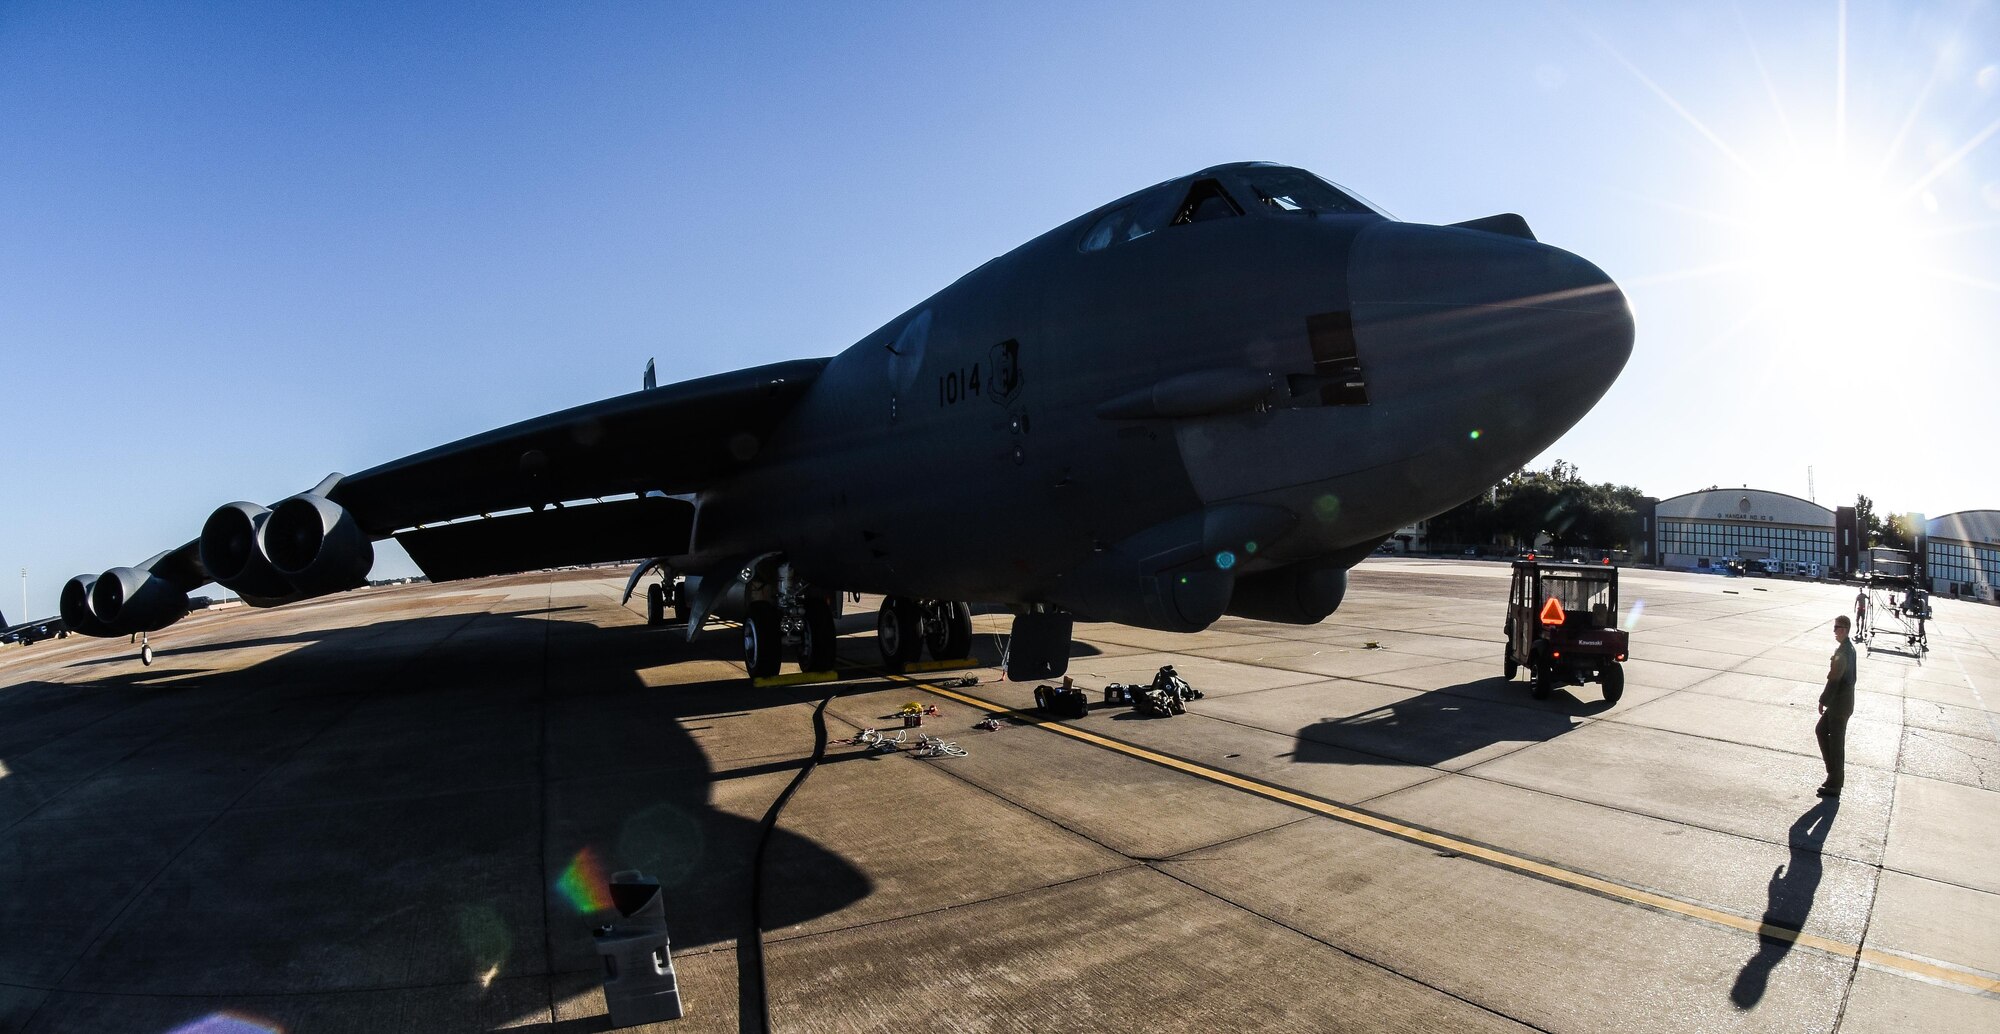 Aircrew unload their gear from a B-52 Stratofortress at Barksdale Air Force Base, La., Oct. 30, 2016, after supporting U.S. Strategic Command exercise Global Thunder 17.  GT17 is an invaluable training opportunity to exercise all USSTRATCOM mission areas and create the conditions for strategic deterrence against a variety of threats. Exercises like GT17 involve extensive planning and coordination to provide unique training opportunities for assigned units and forces. (U.S. Air Force photo/Senior Airman Luke Hill)